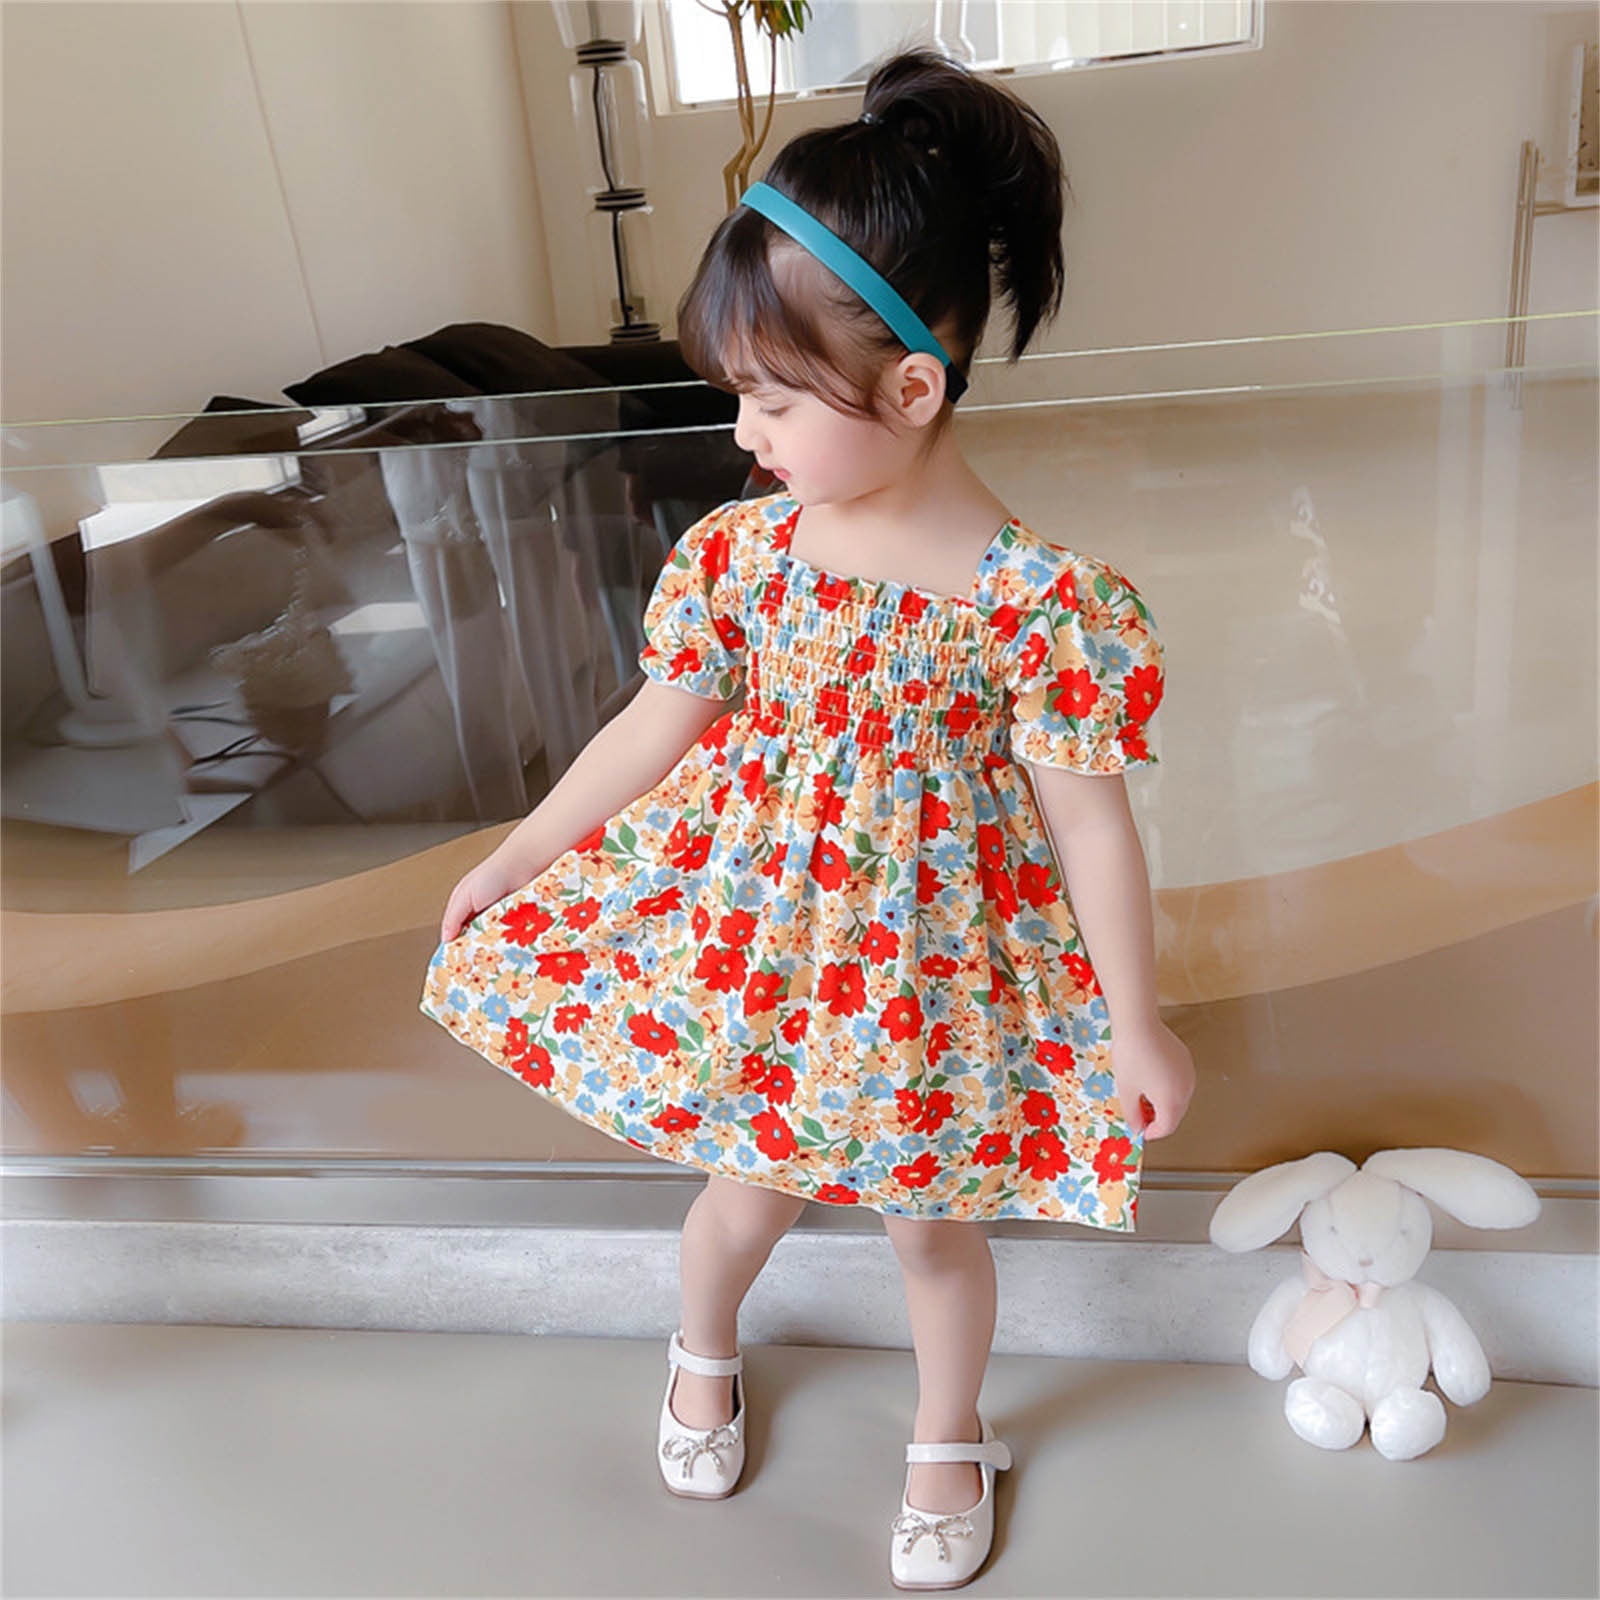 Baby Girl Dresses In Mumbai (Bombay) - Prices, Manufacturers & Suppliers